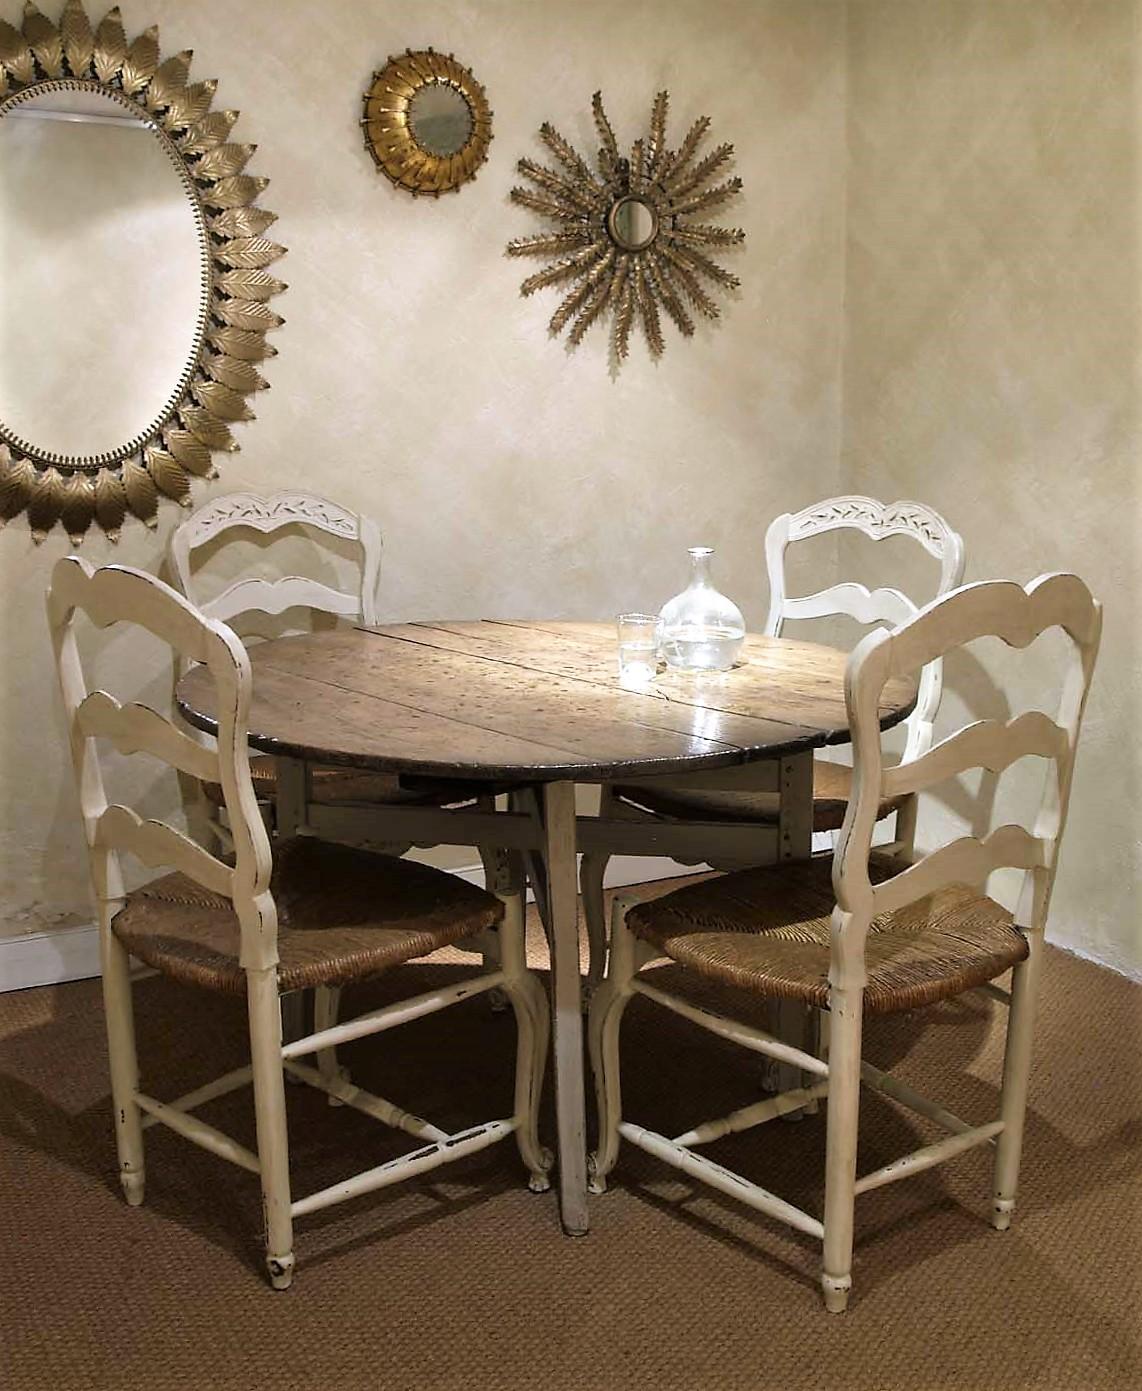 A 19th century French chestnut wood vineyard table with round top and patinated folding X-legs.
The round top is thick, heavy and strong. The top has a terrific aged patina showing marks from the pass of years and beautiful wood veins. The top